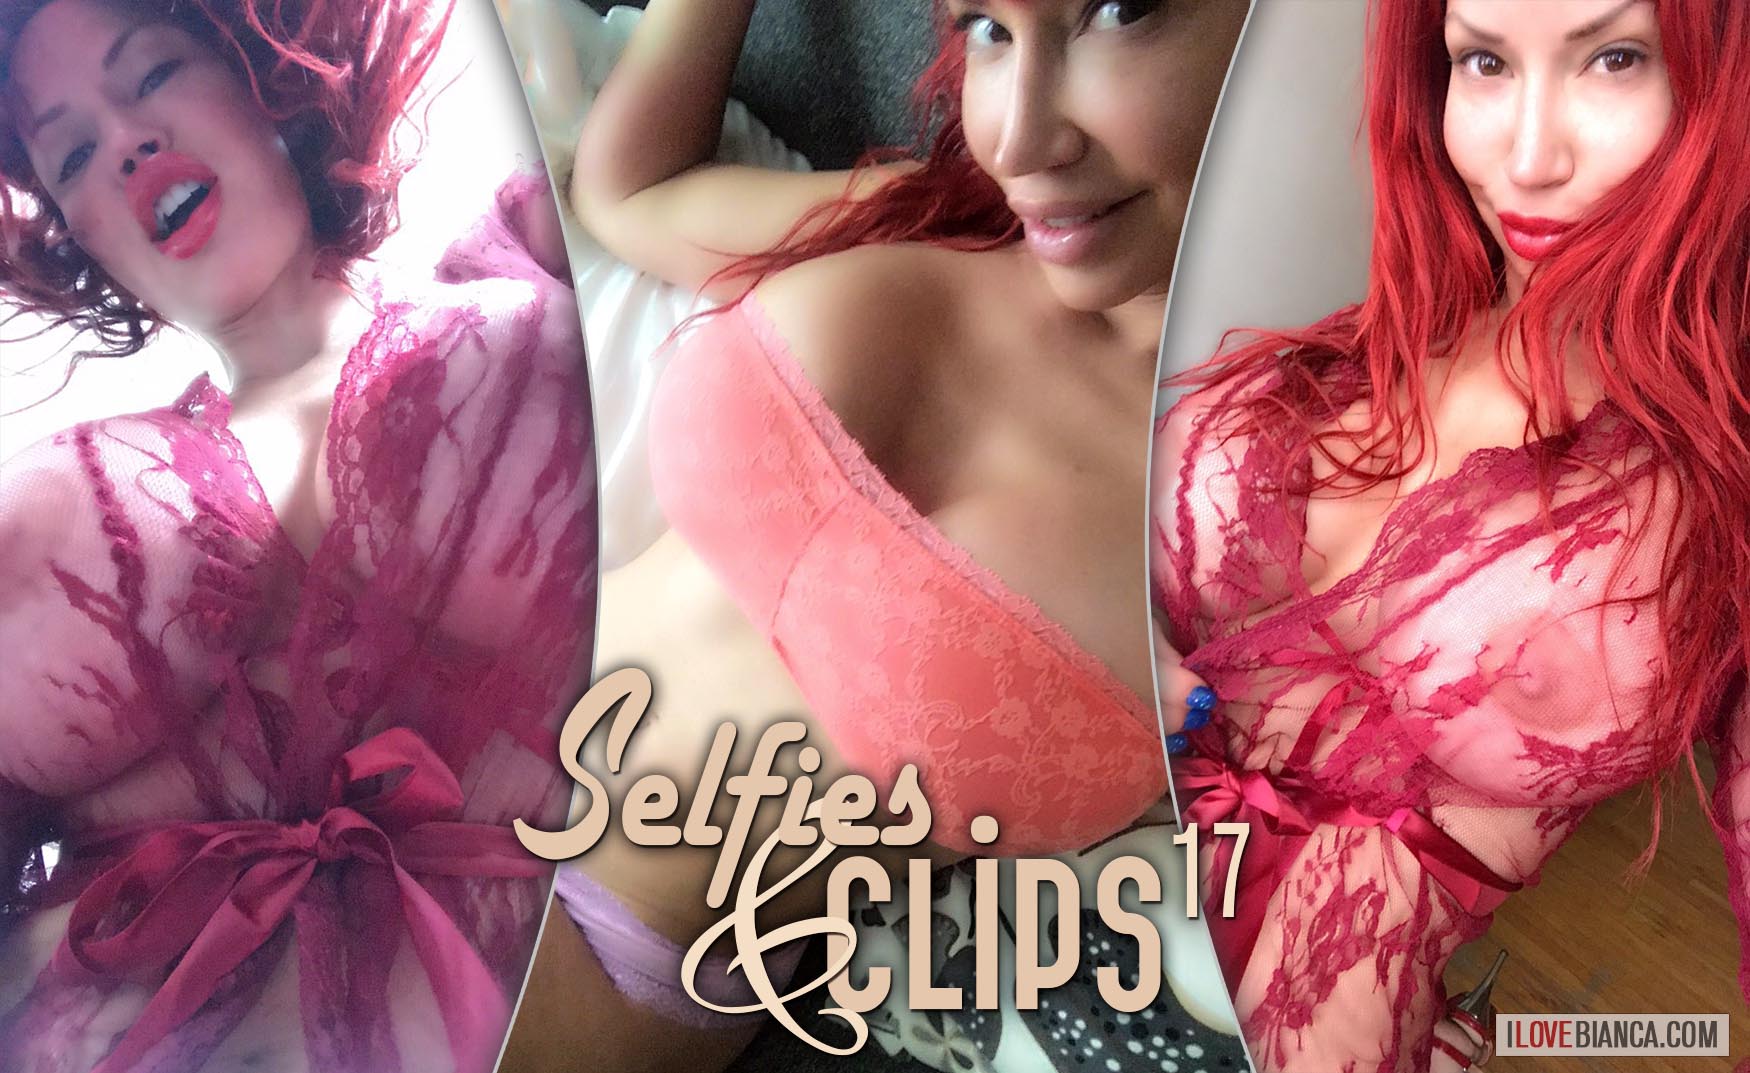 bianca beauchamp up close and personal cover